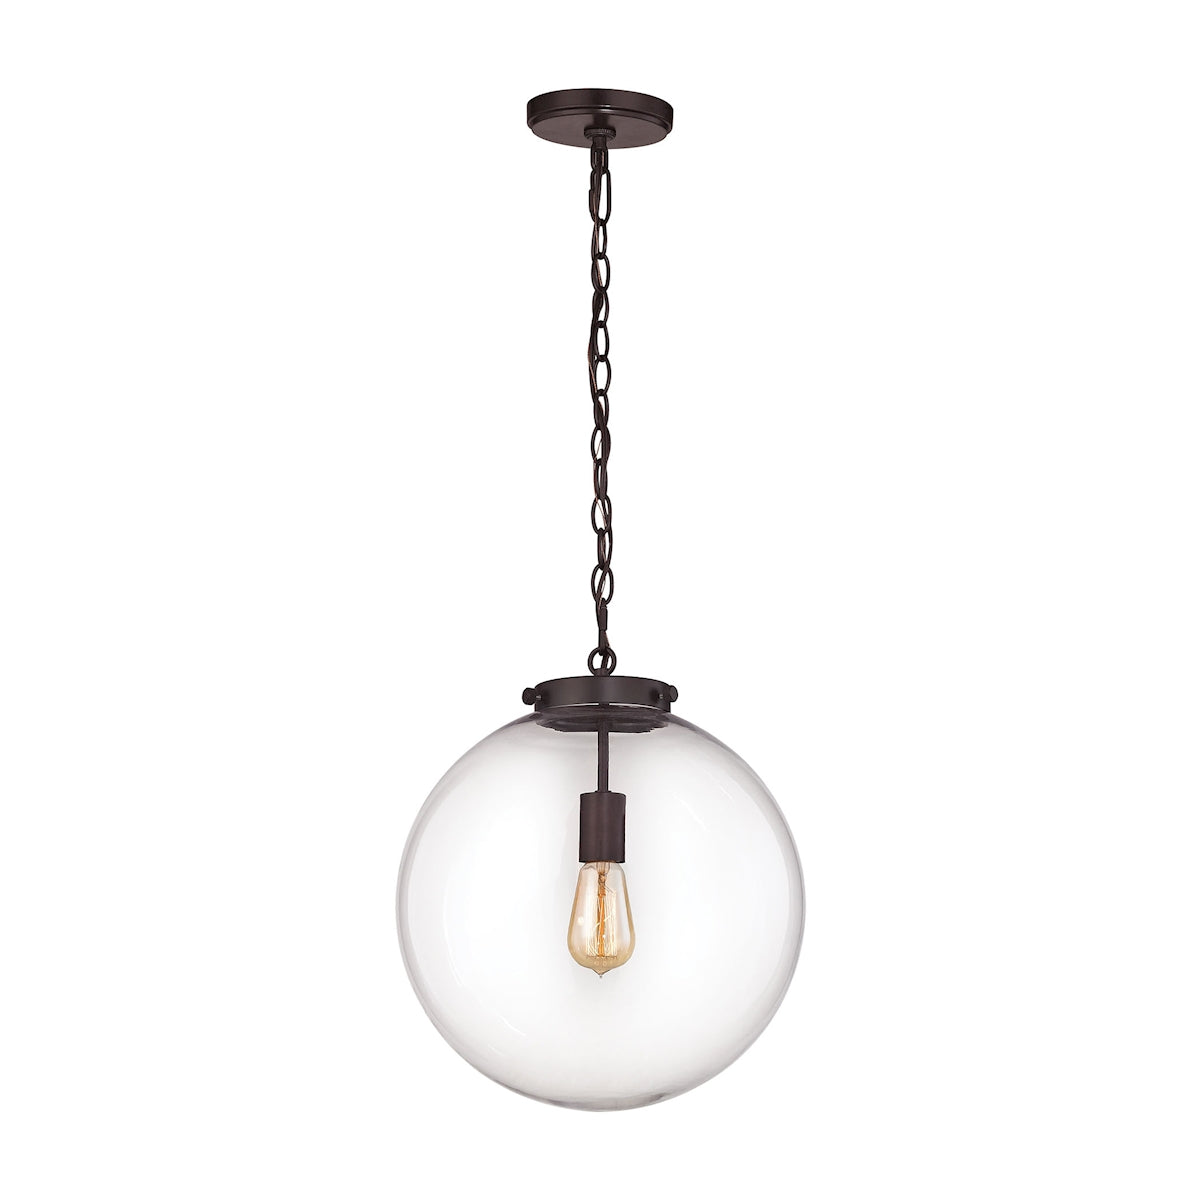 ELK Lighting 16373/1 Gramercy 1-Light Pendant in Oil Rubbed Bronze with Clear Glass